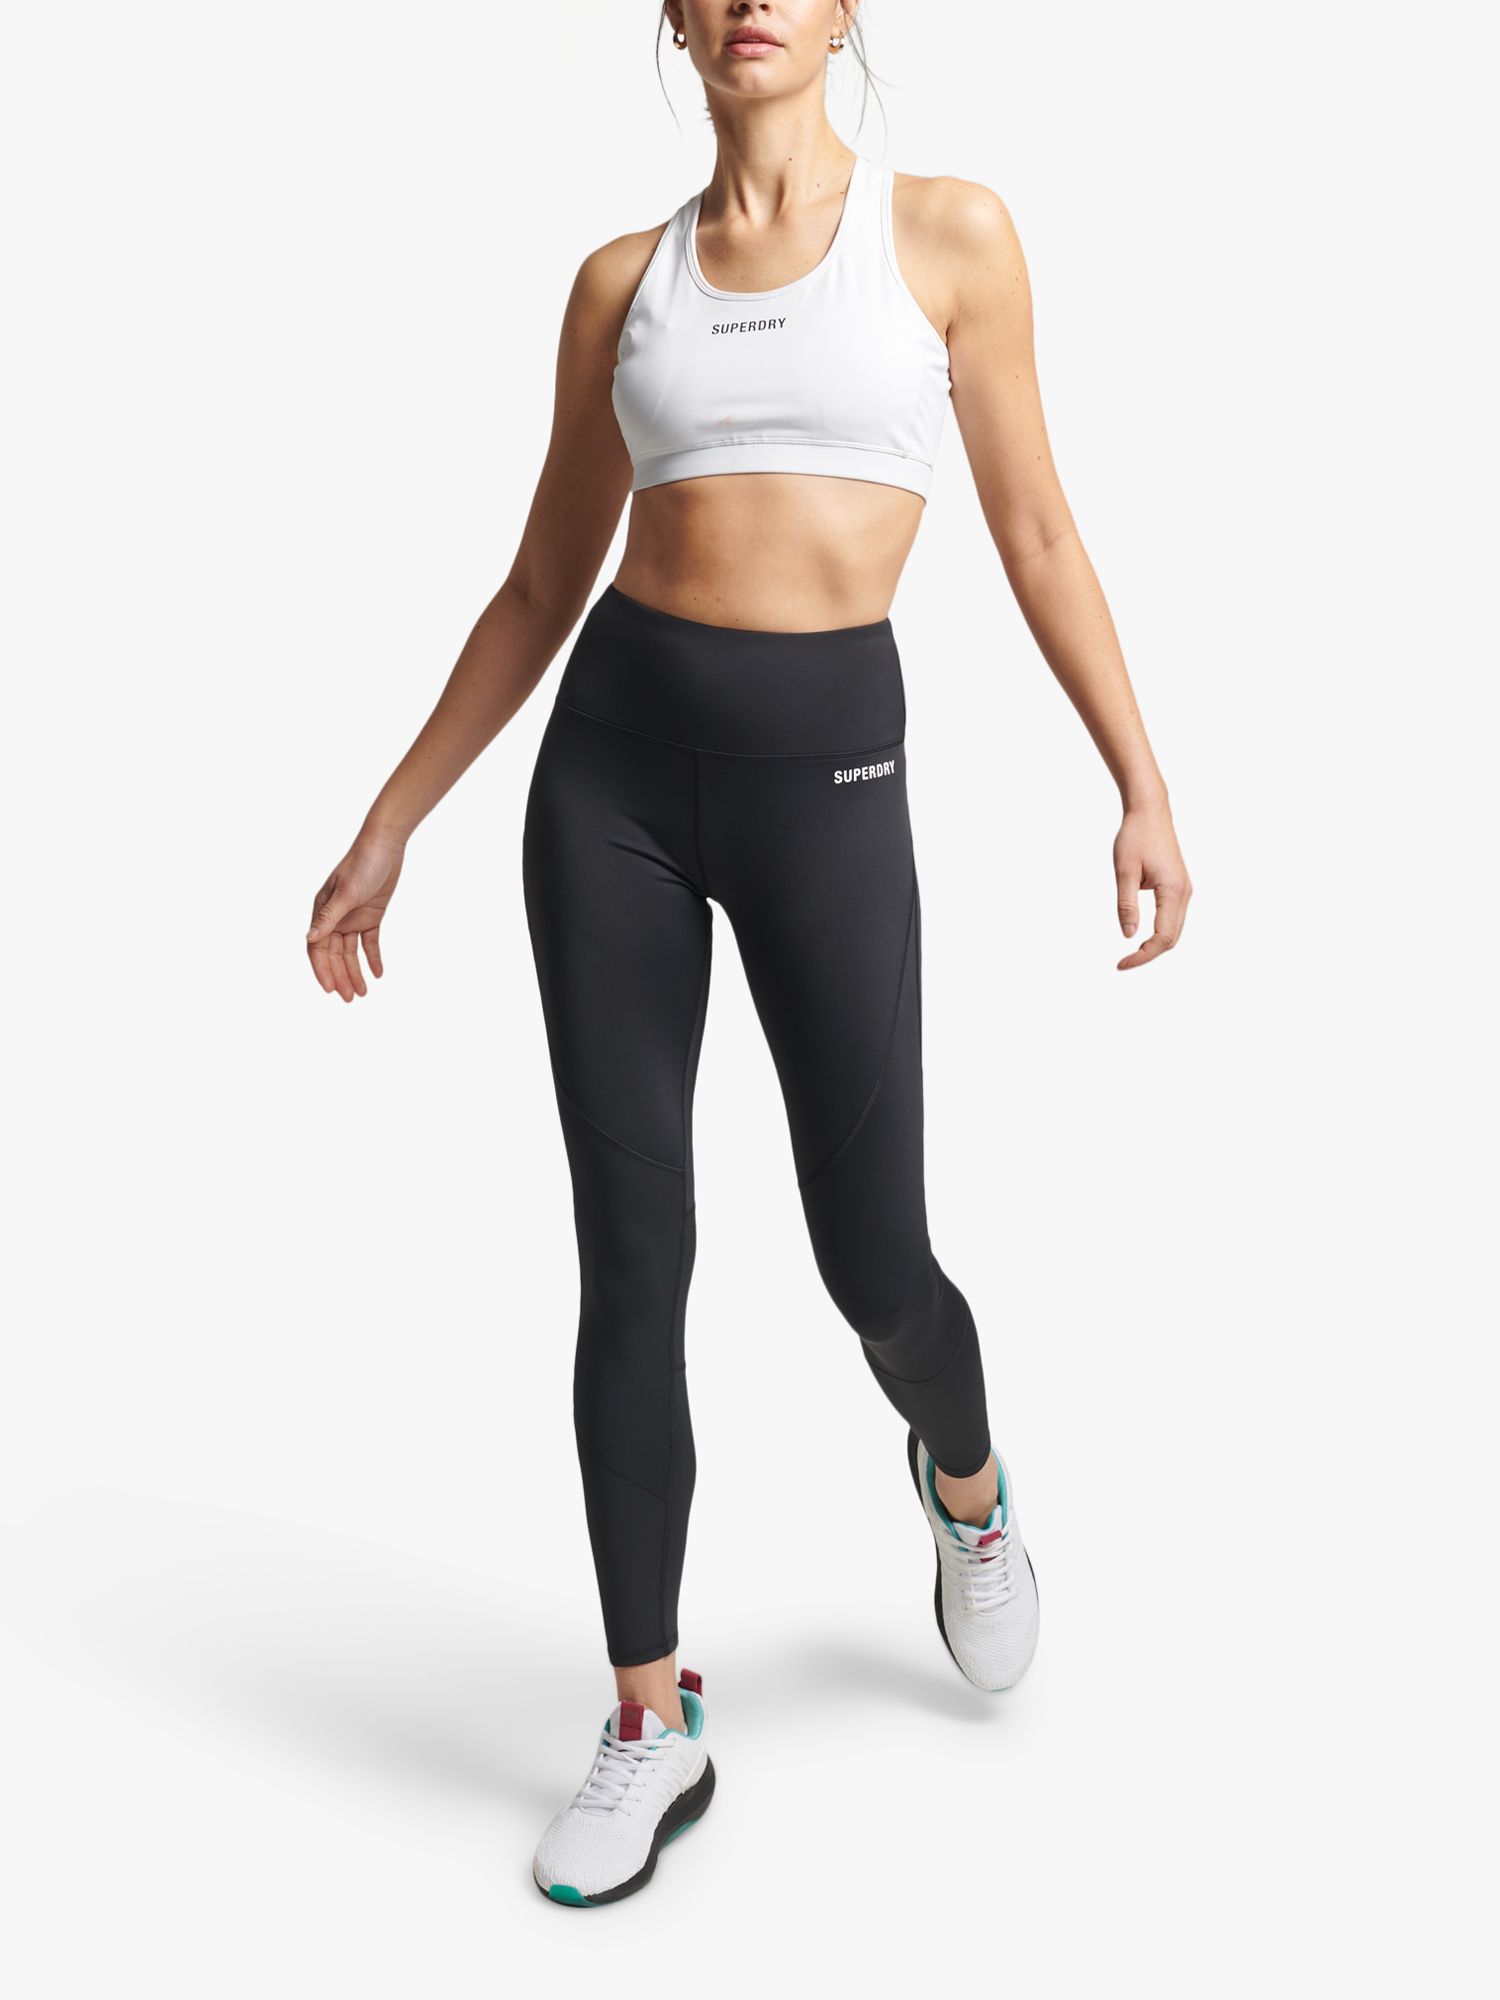 Superdry Core Length Tight Leggings at Lewis & Partners